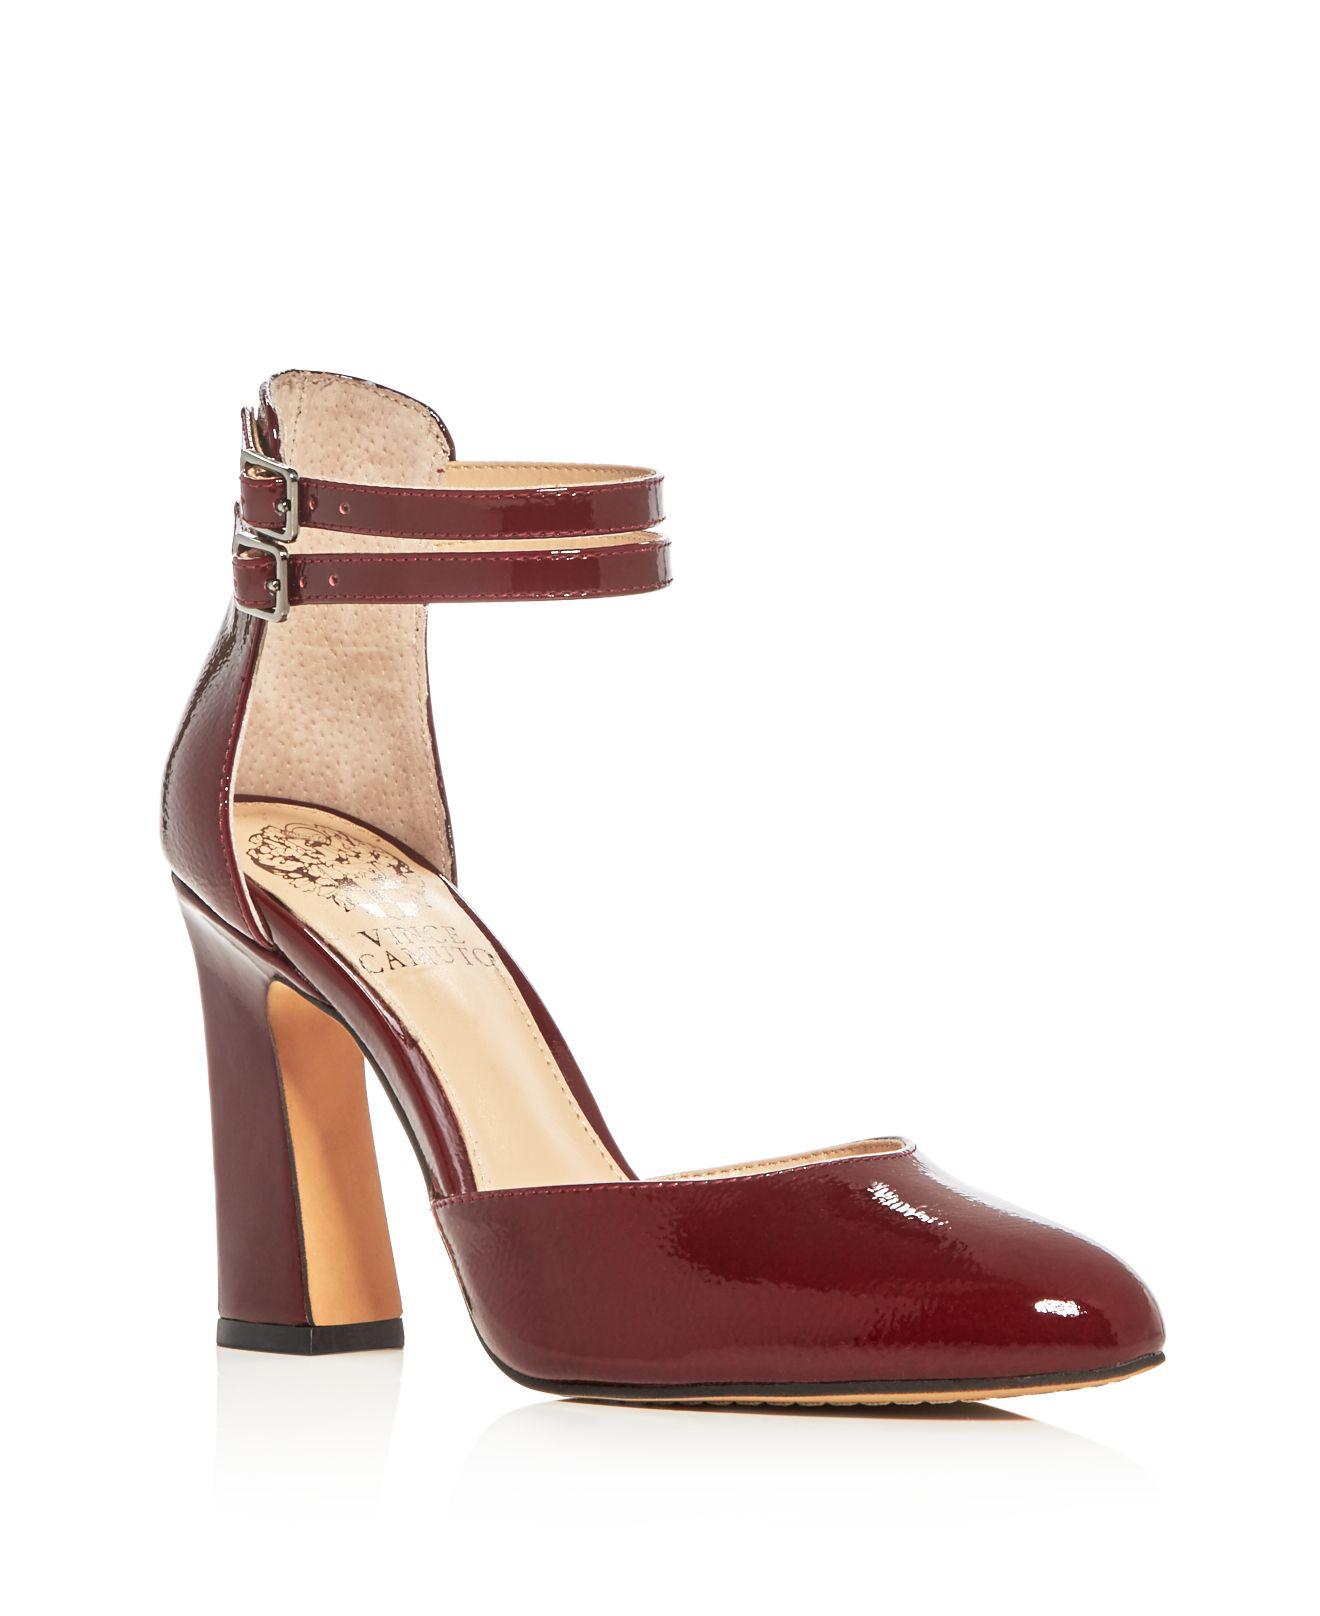 Lyst - Vince Camuto Dorinda Double Ankle Strap Pumps in Red